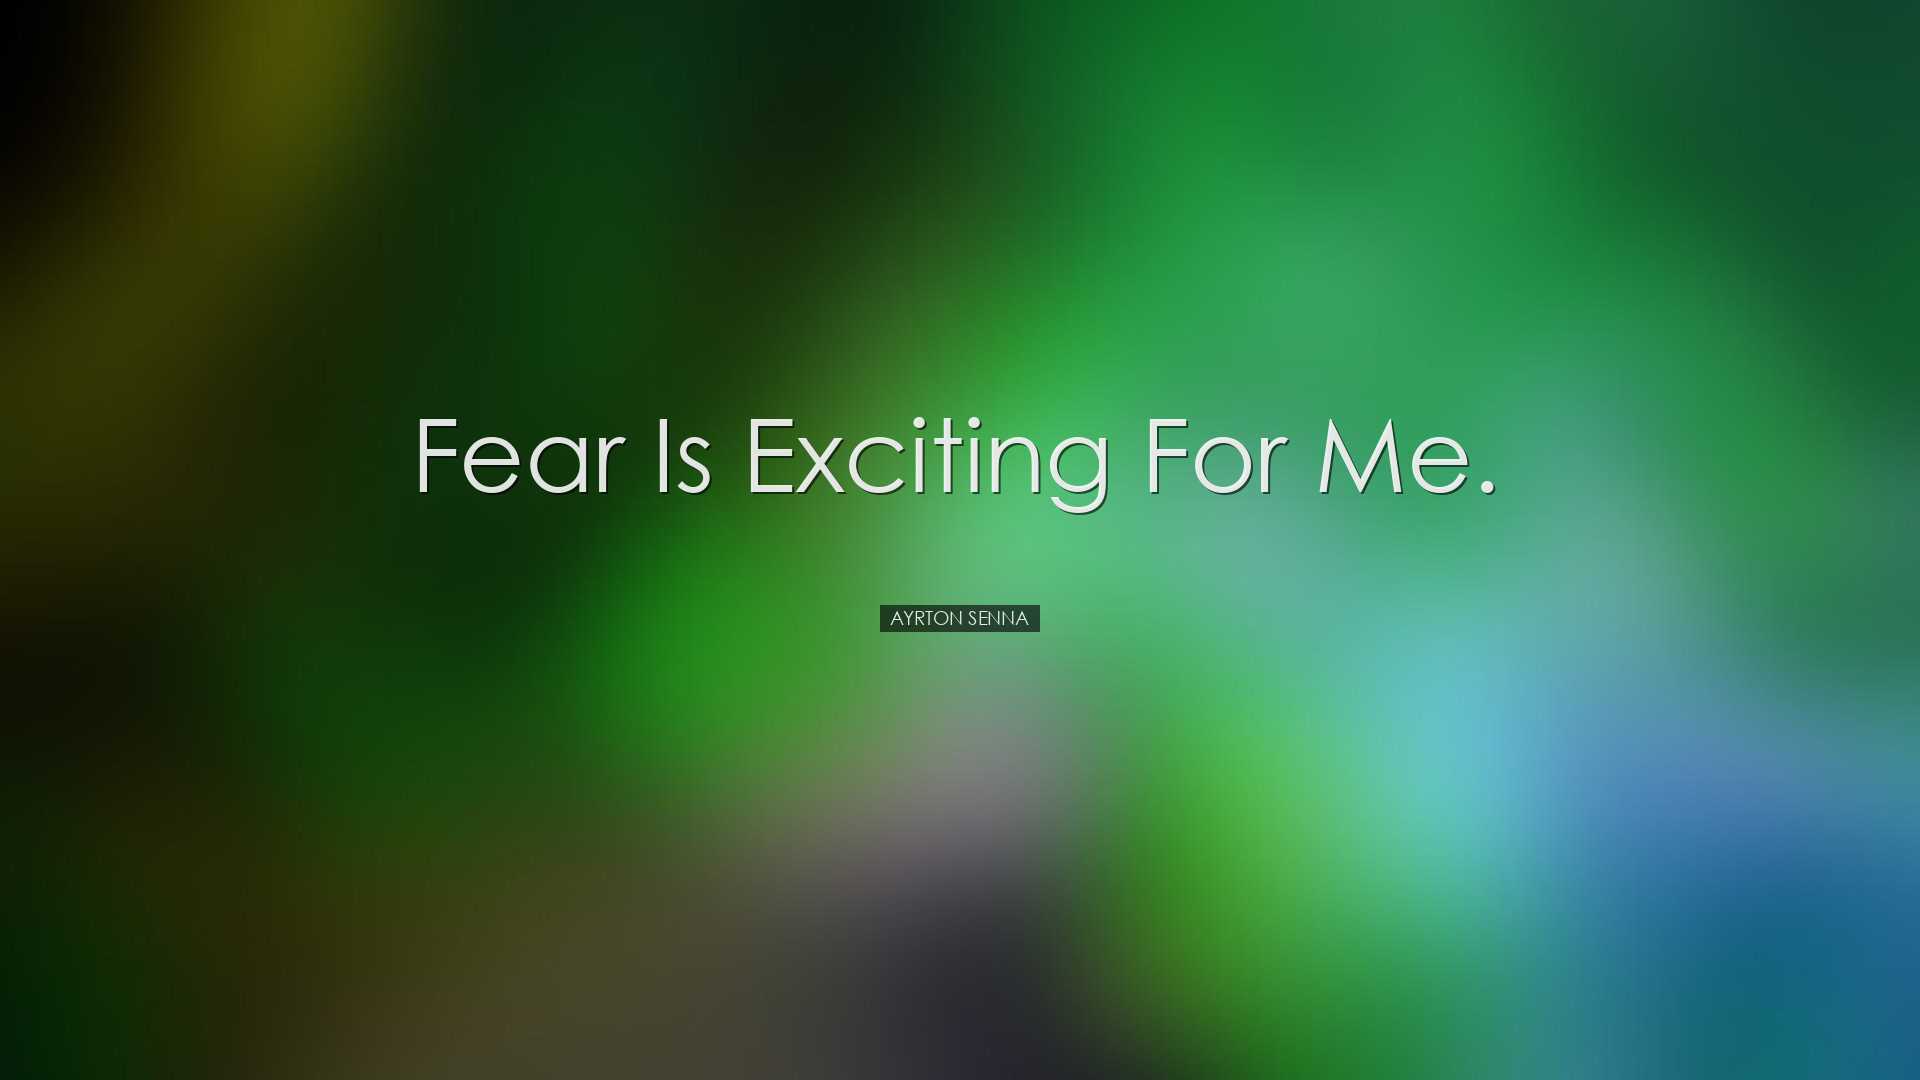 Fear is exciting for me. - Ayrton Senna